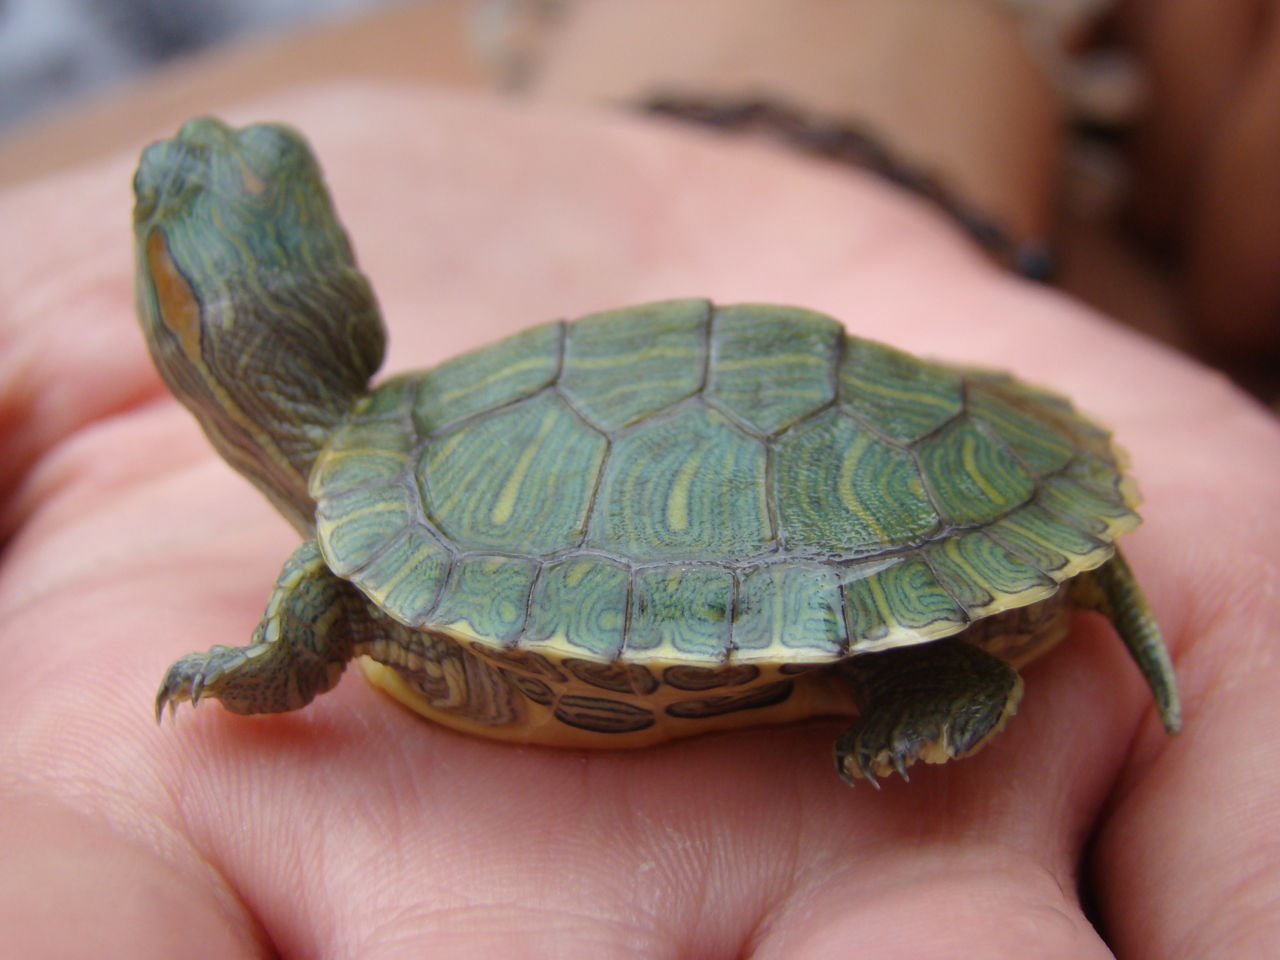 turtles that stay small